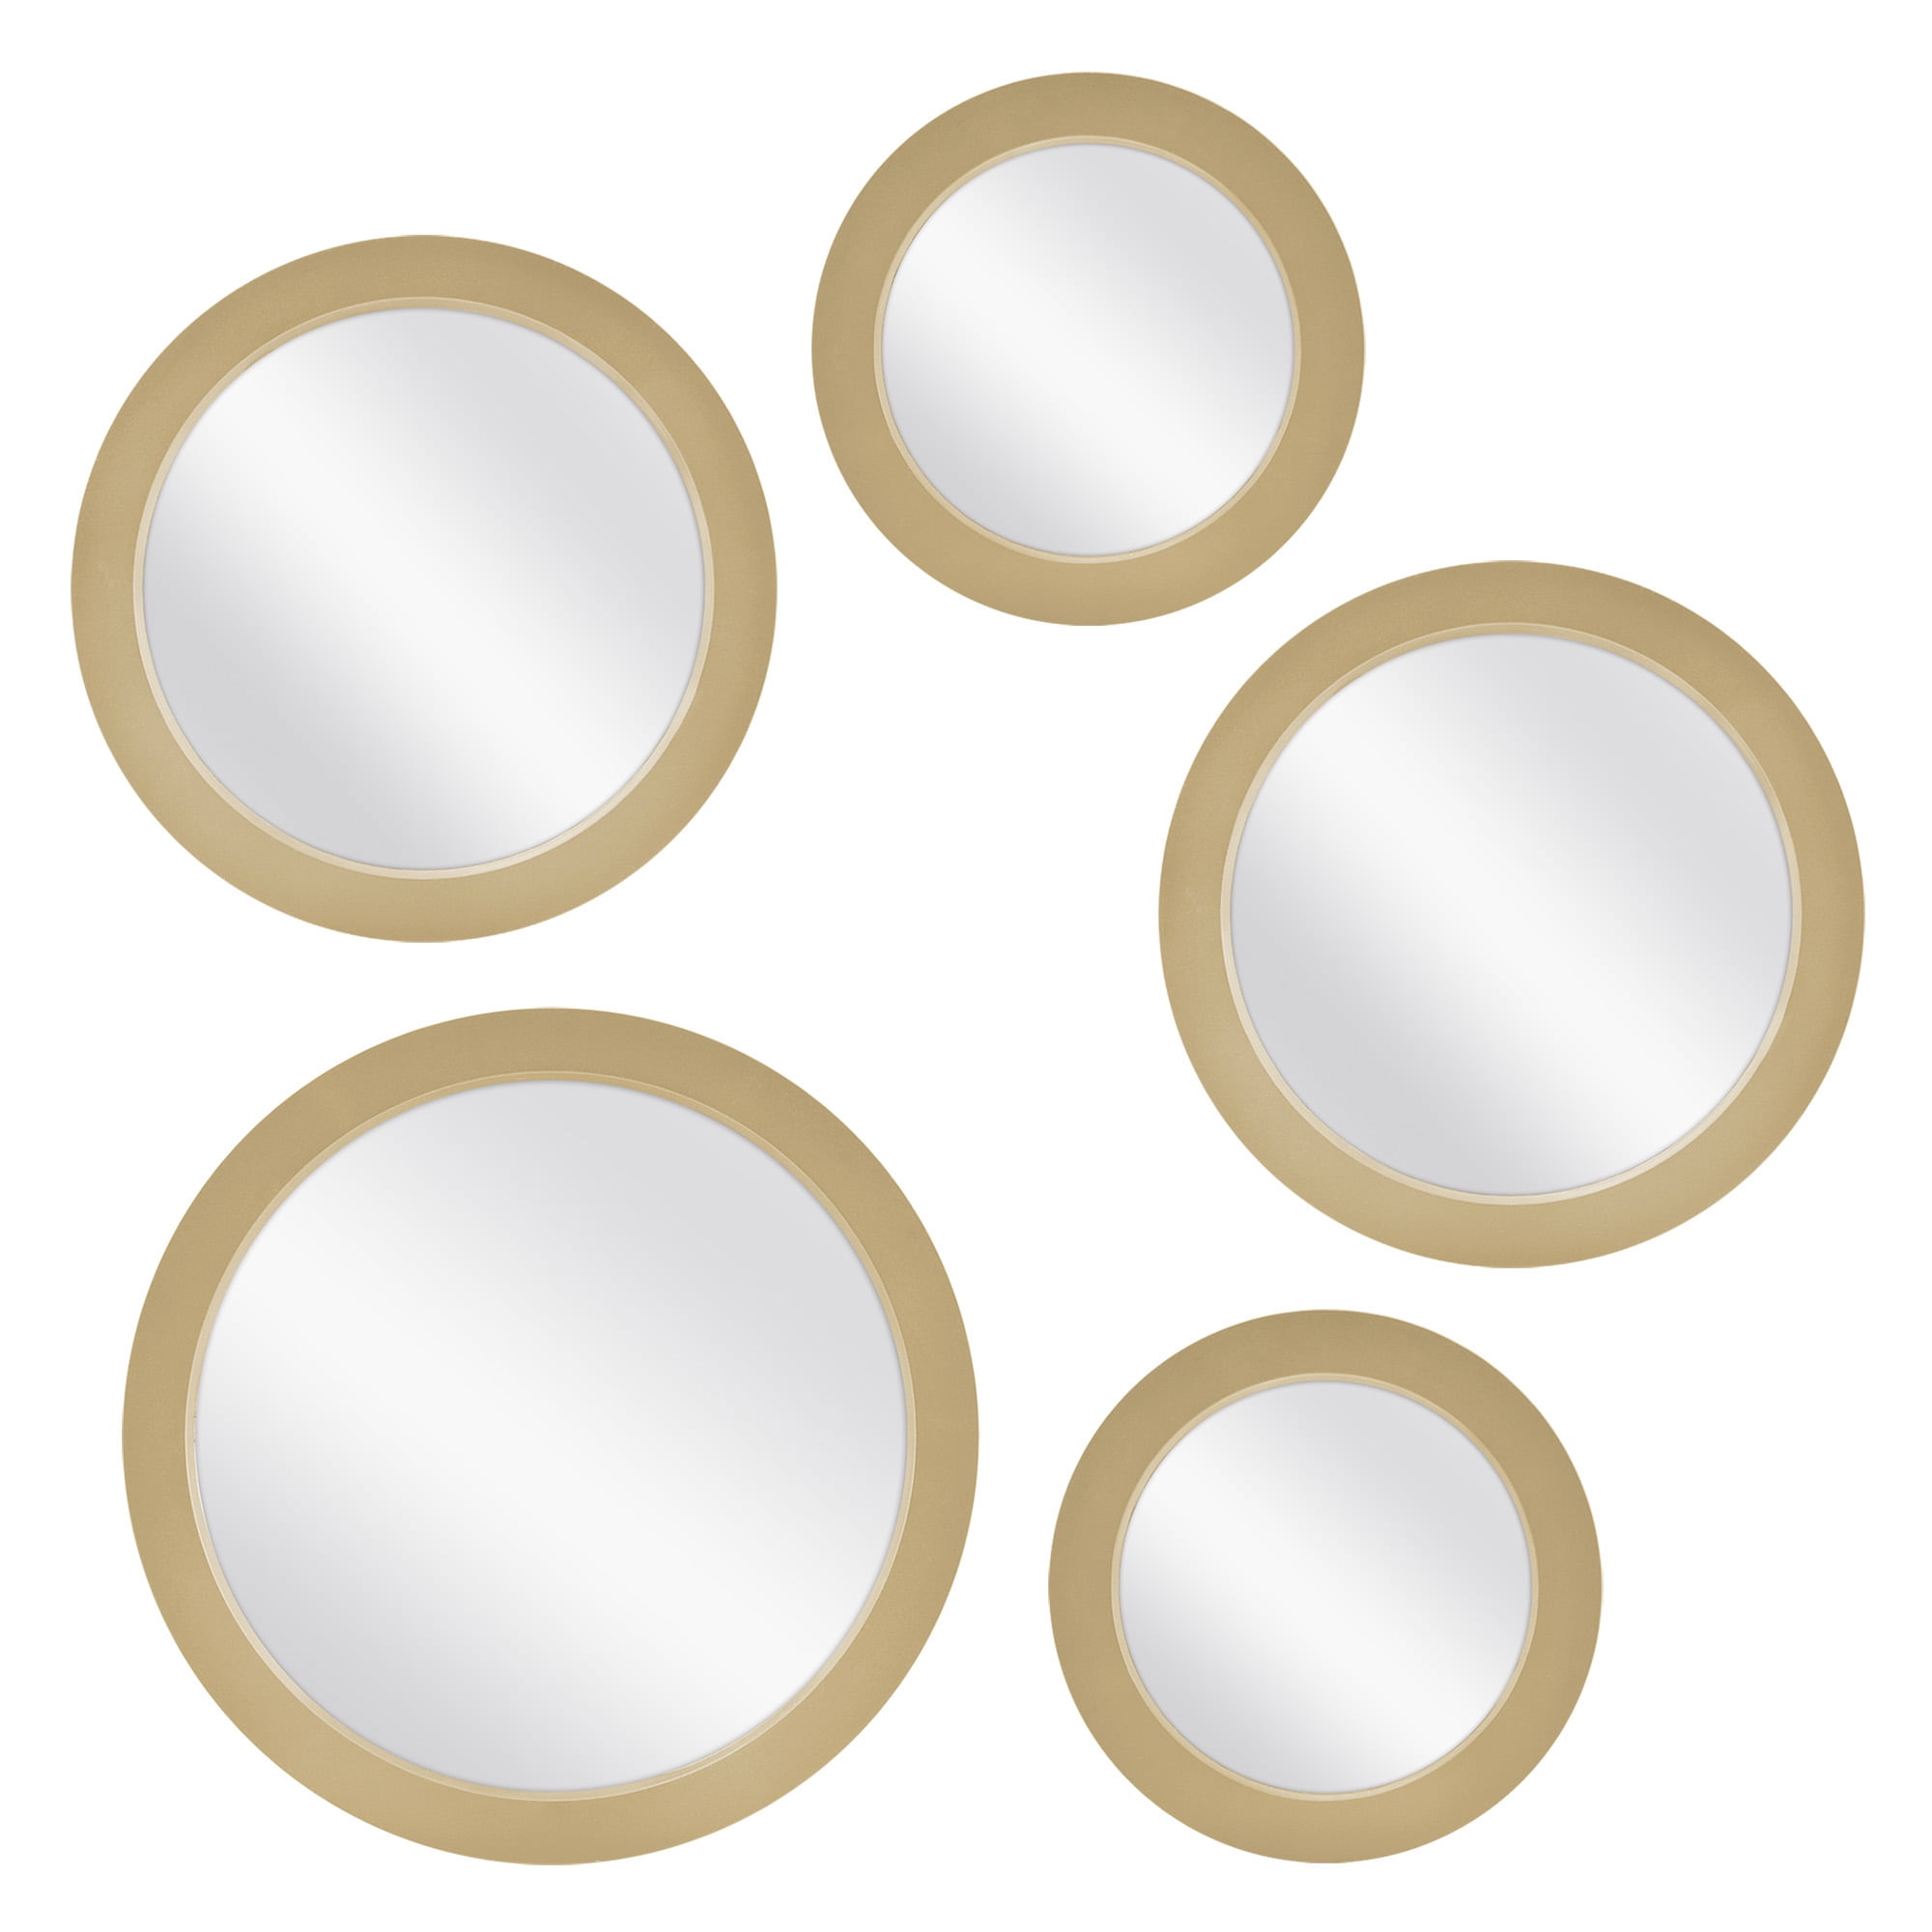 Mainstays 5 Piece Mirror Set Available, Set Of Mirrors Round